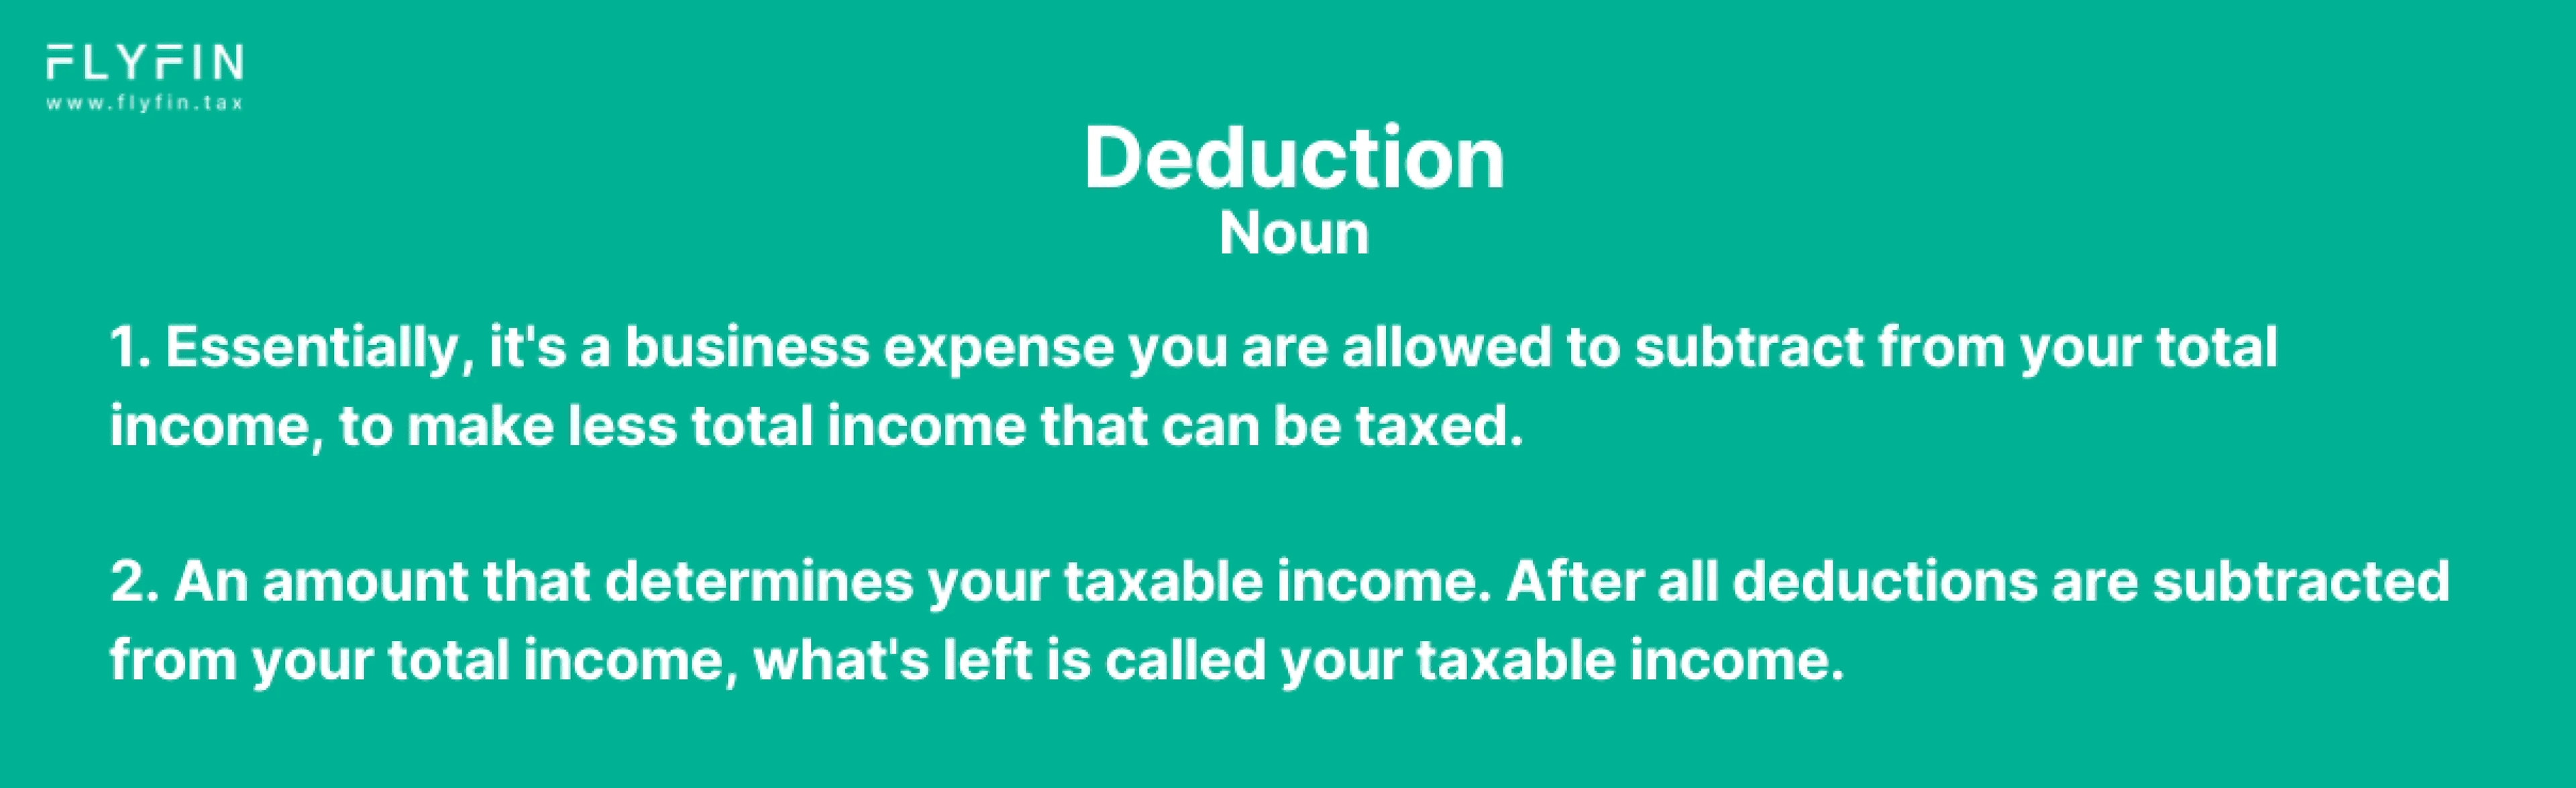 Alt text: Image explaining tax deductions - how they work and reduce taxable income. Useful for self-employed, 1099 and freelance workers.